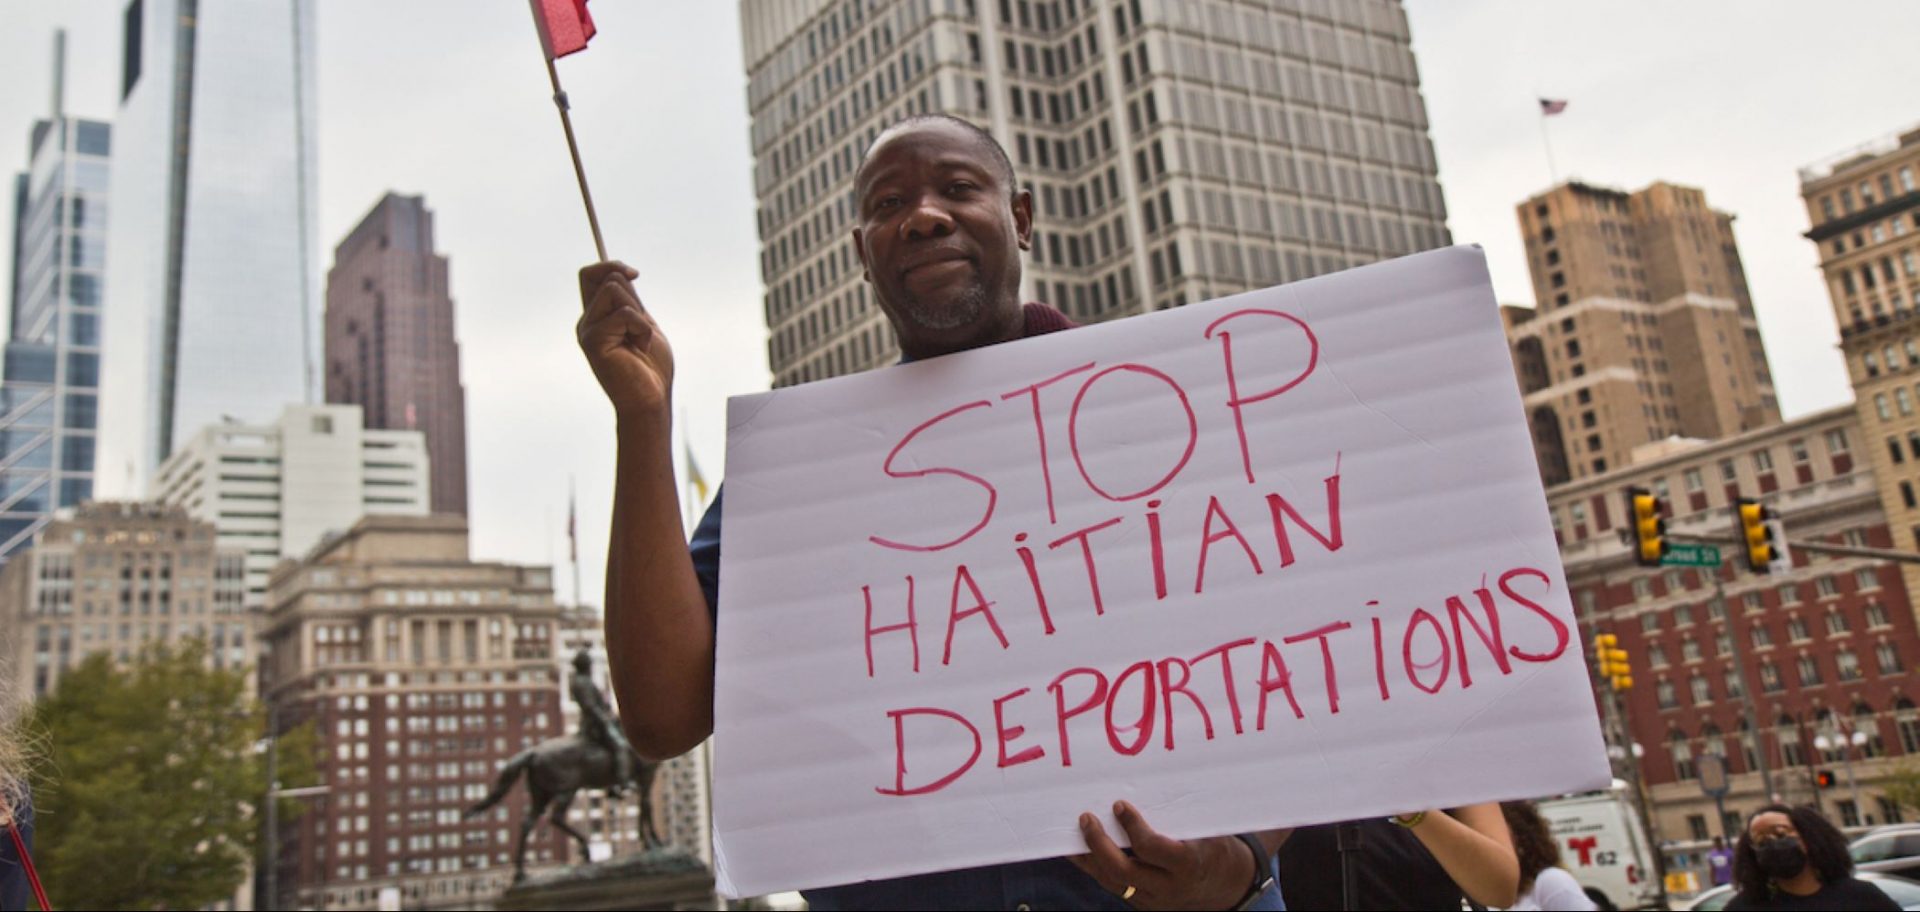 Joel Leon protested in solidarity with Haitians at the border and against the Biden administration’s deportation of Haitian asylum-seekers at City Hall in Philadelphia on Sept. 28, 2021